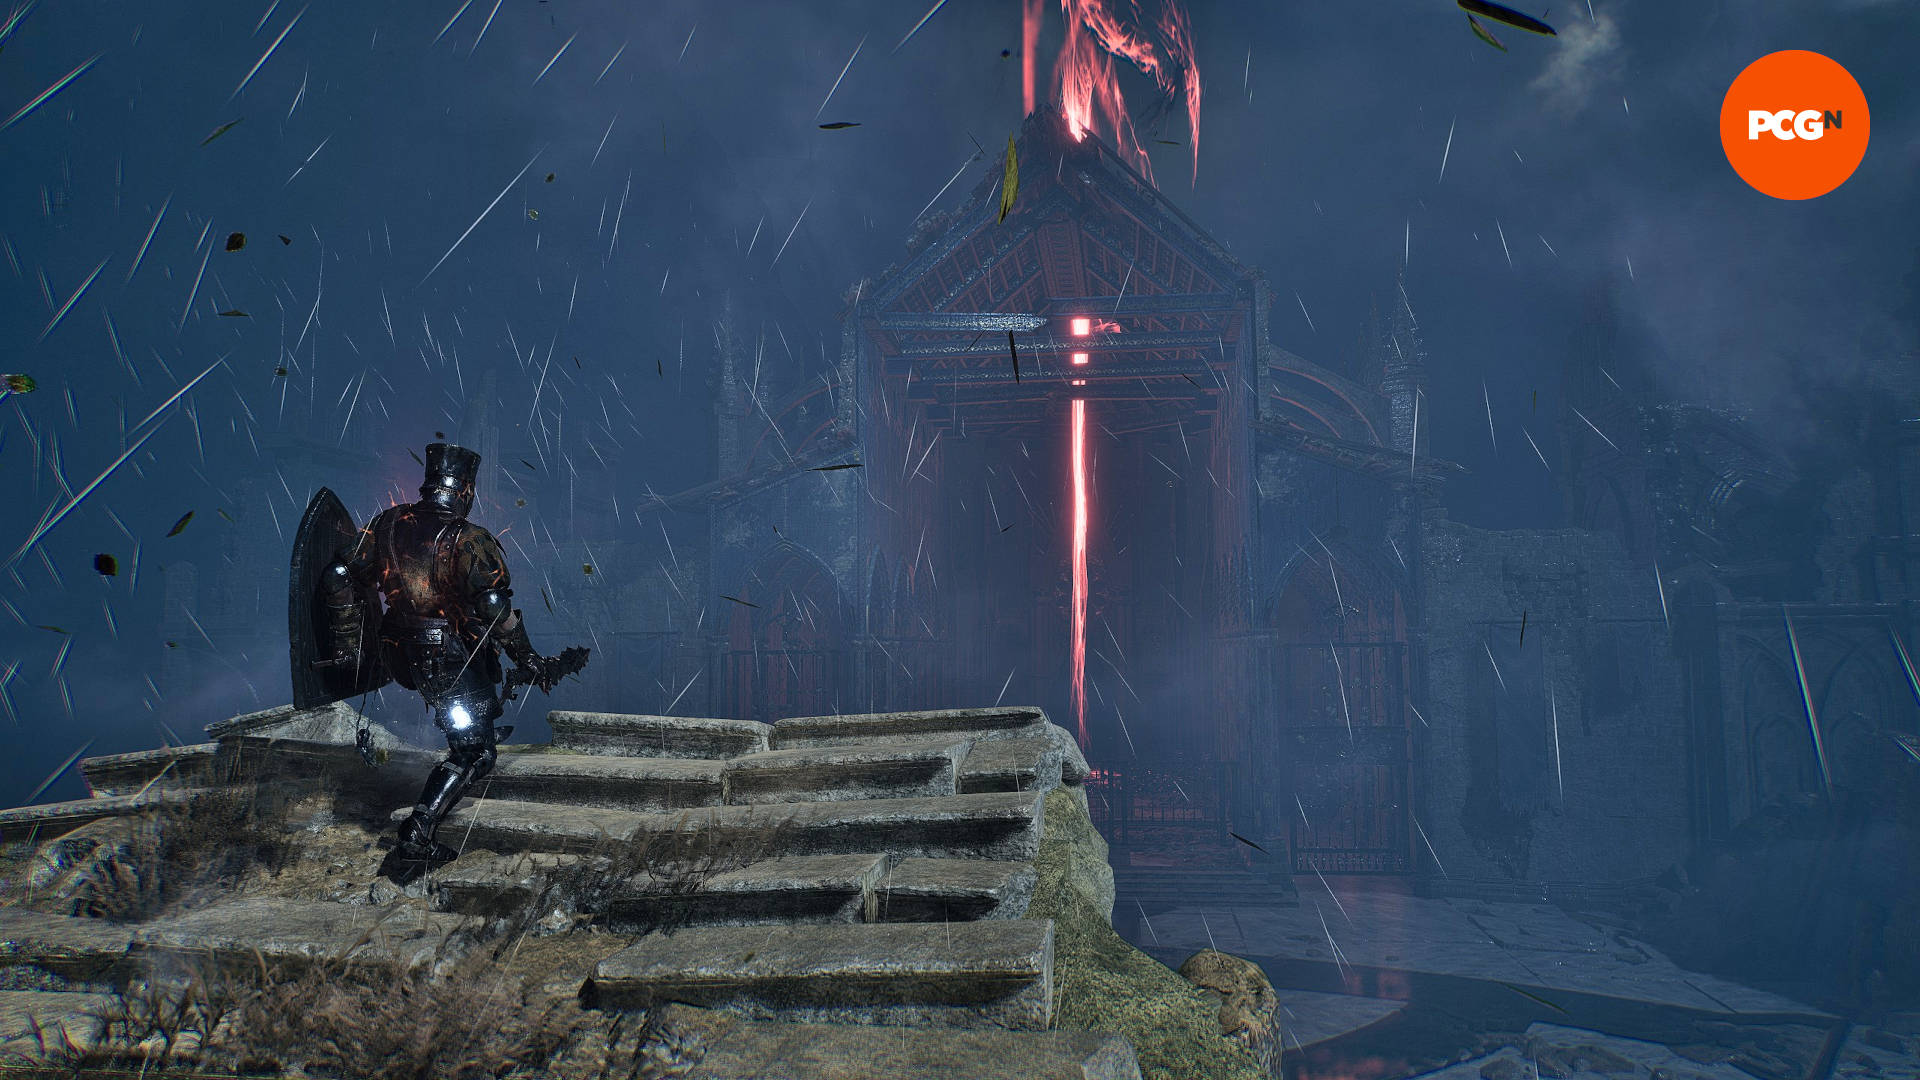 Plus: Lords Of The Fallen knocks down the doors!